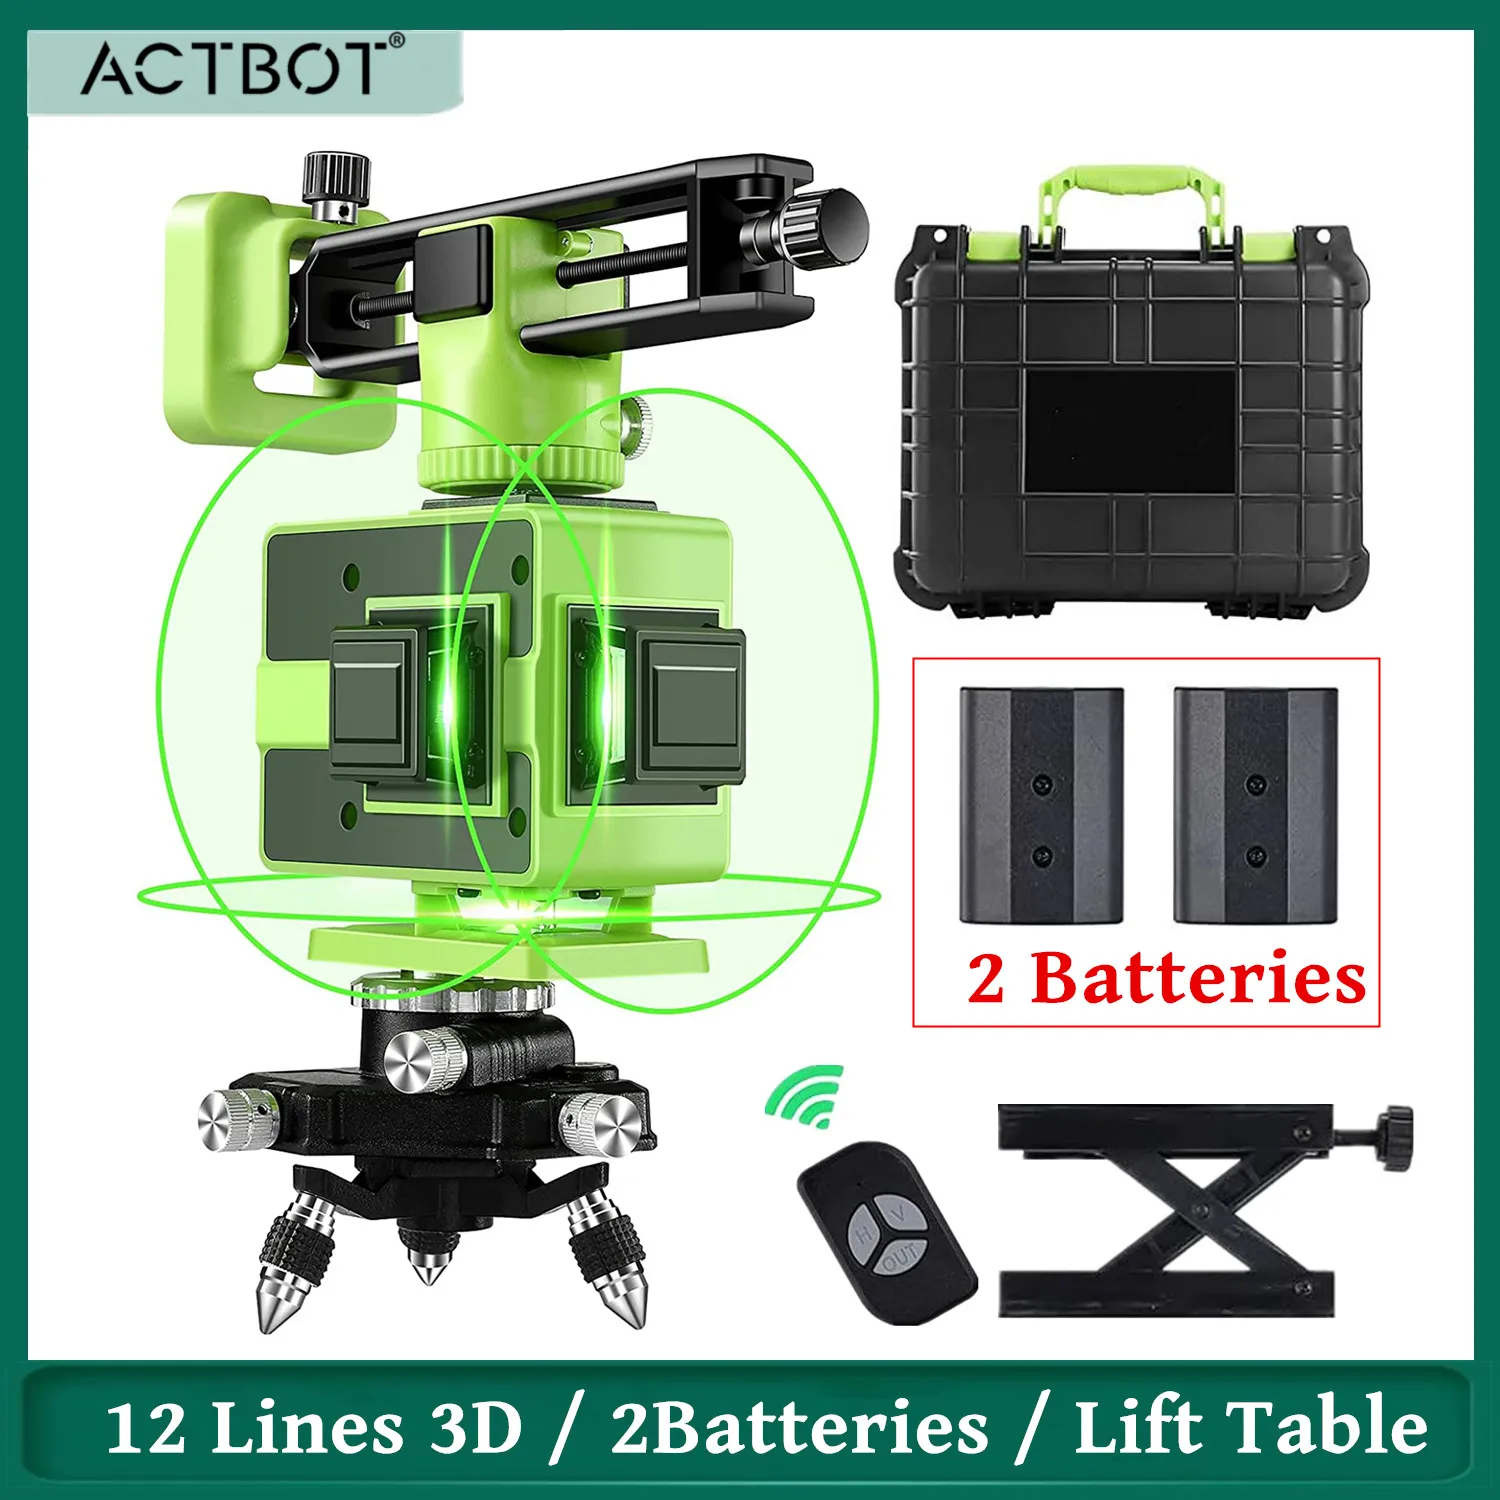 

12 Lines 3D Laser Level Self-Leveling 360° 3D Green Laser Level for ConstructionThree-Plane Cross Line Leveling With 2 Batteries